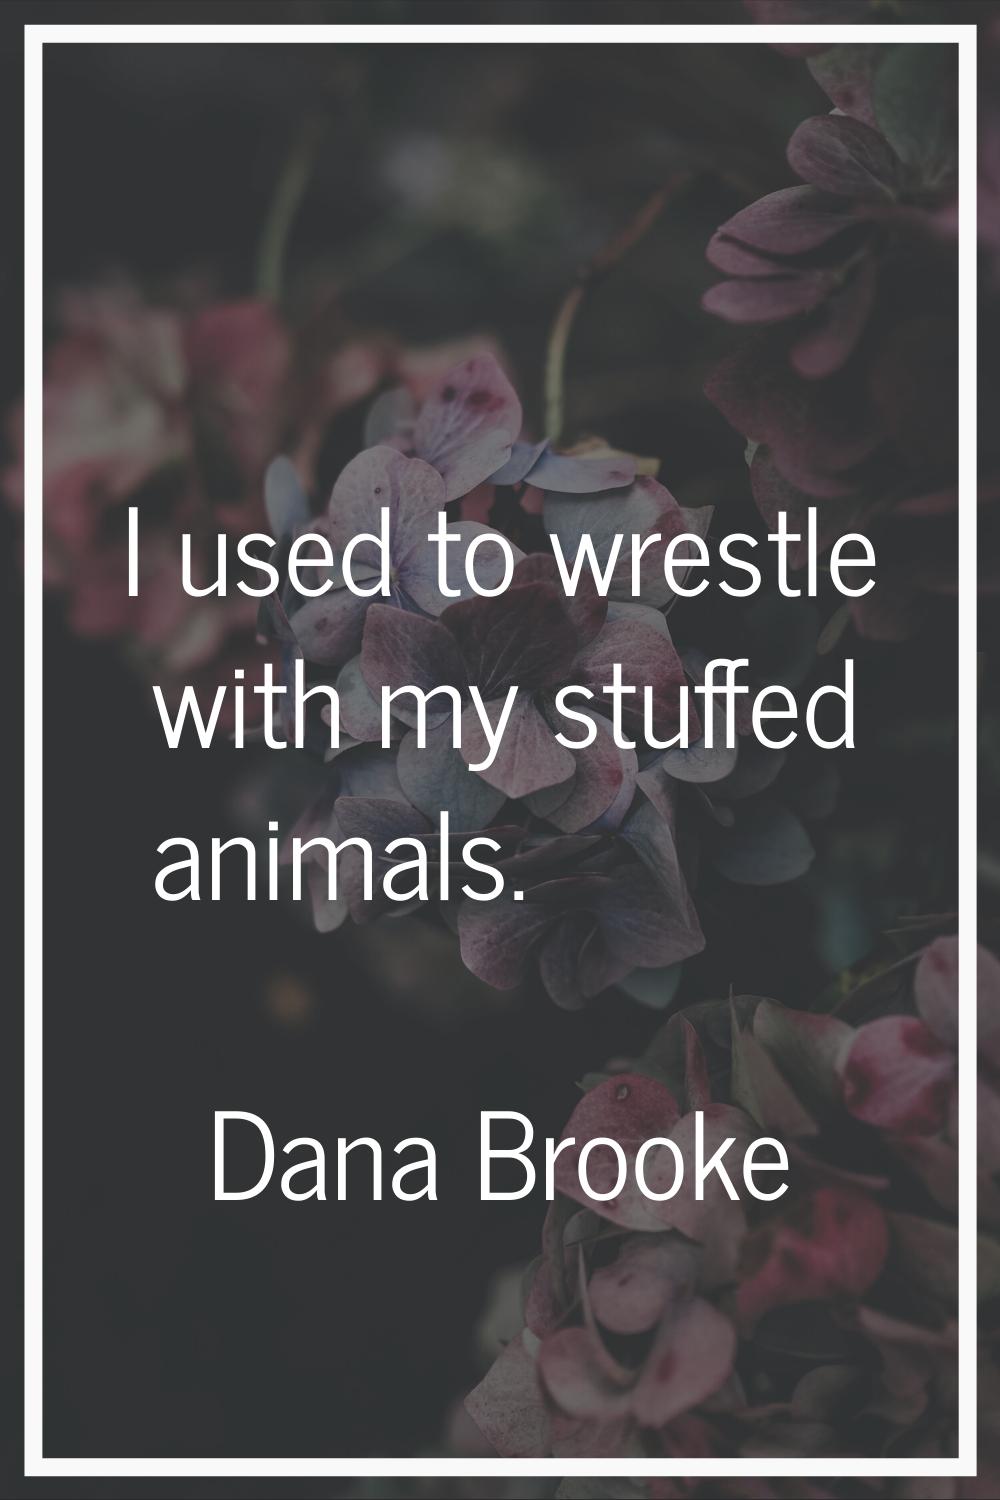 I used to wrestle with my stuffed animals.